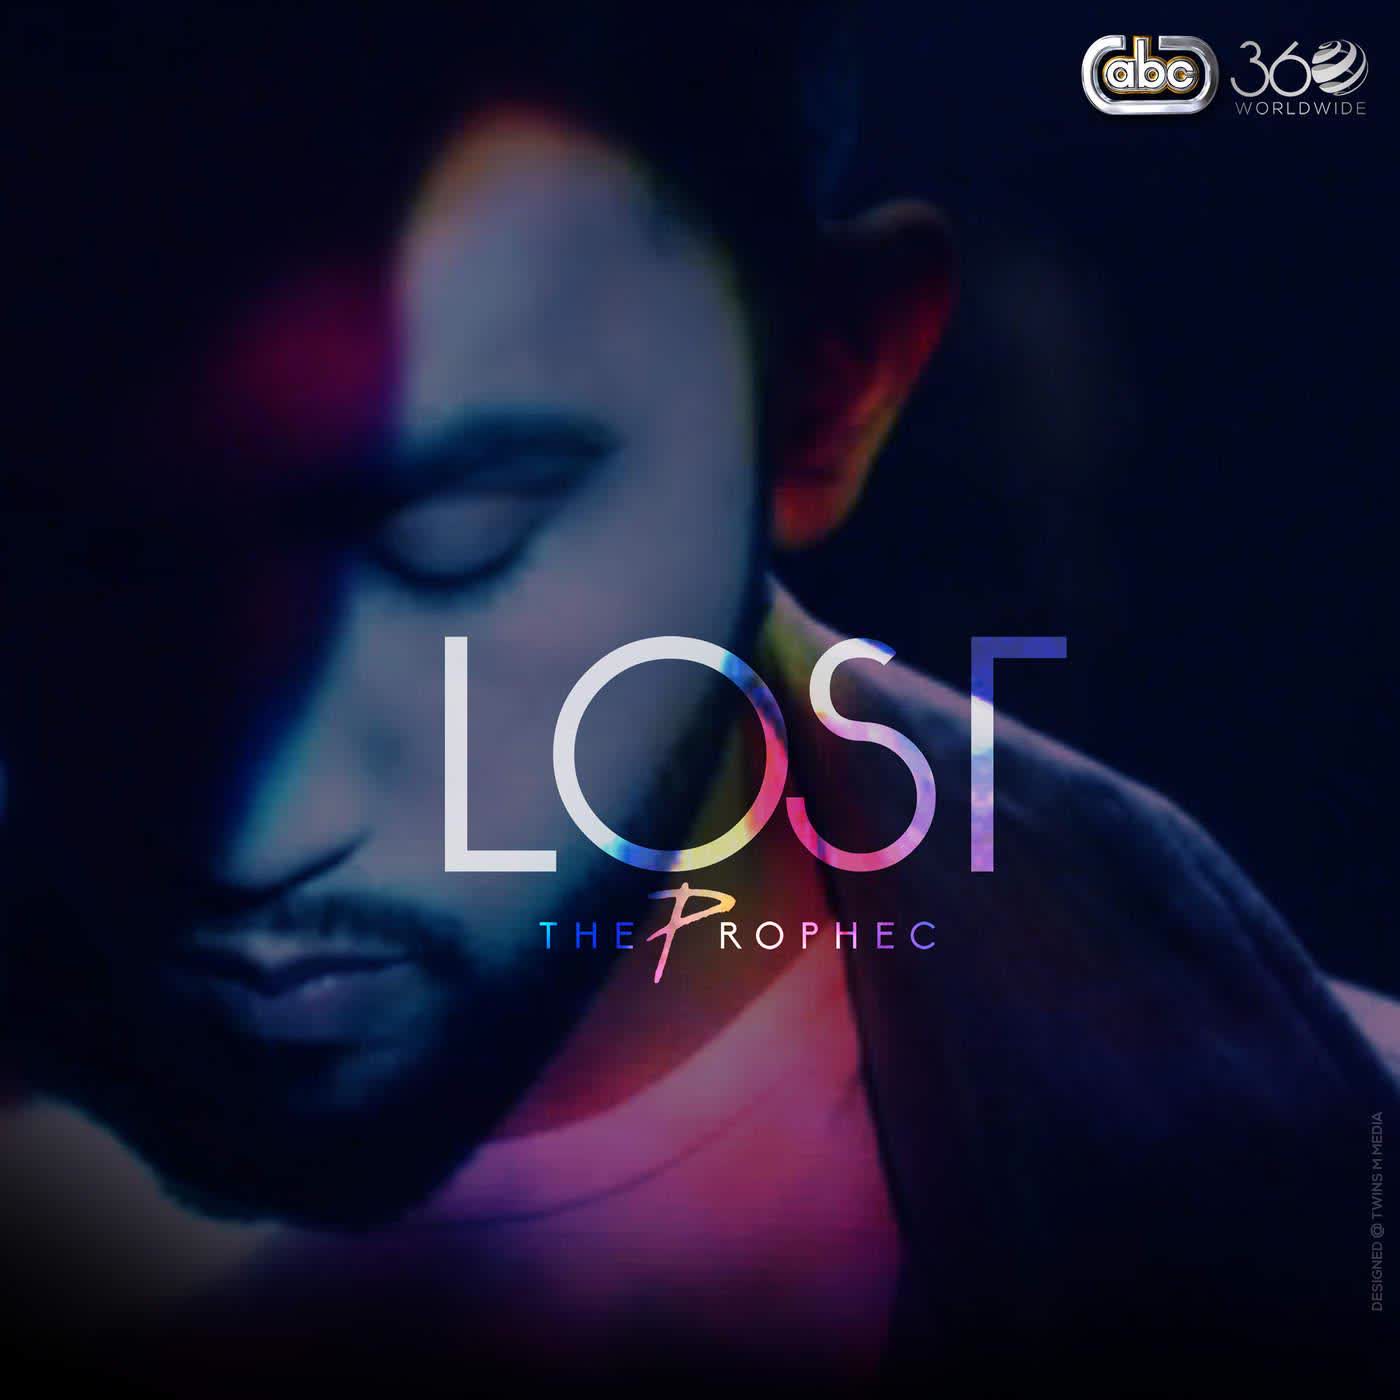 Lost The Prophec  Mp3 song download